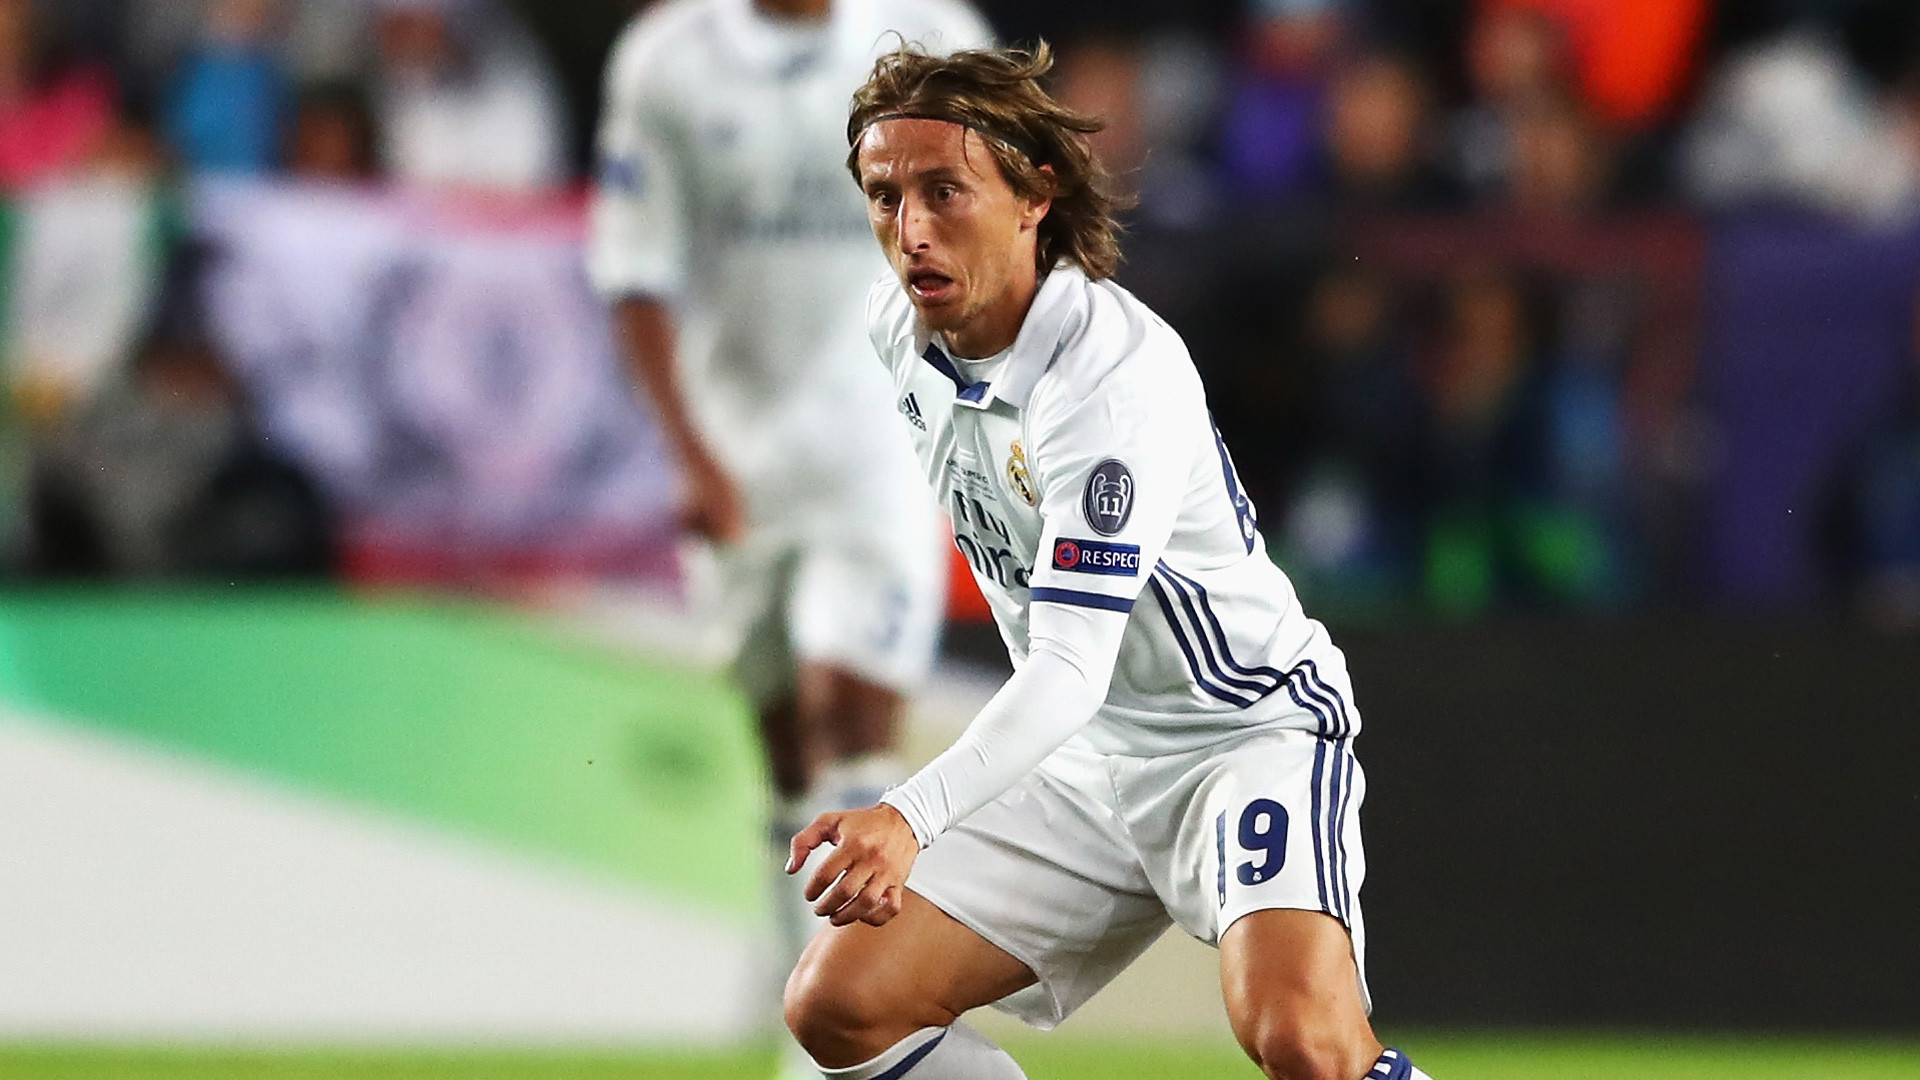 1920x1080 Not good enough - No Modric and no ideas as Madrid slip up again